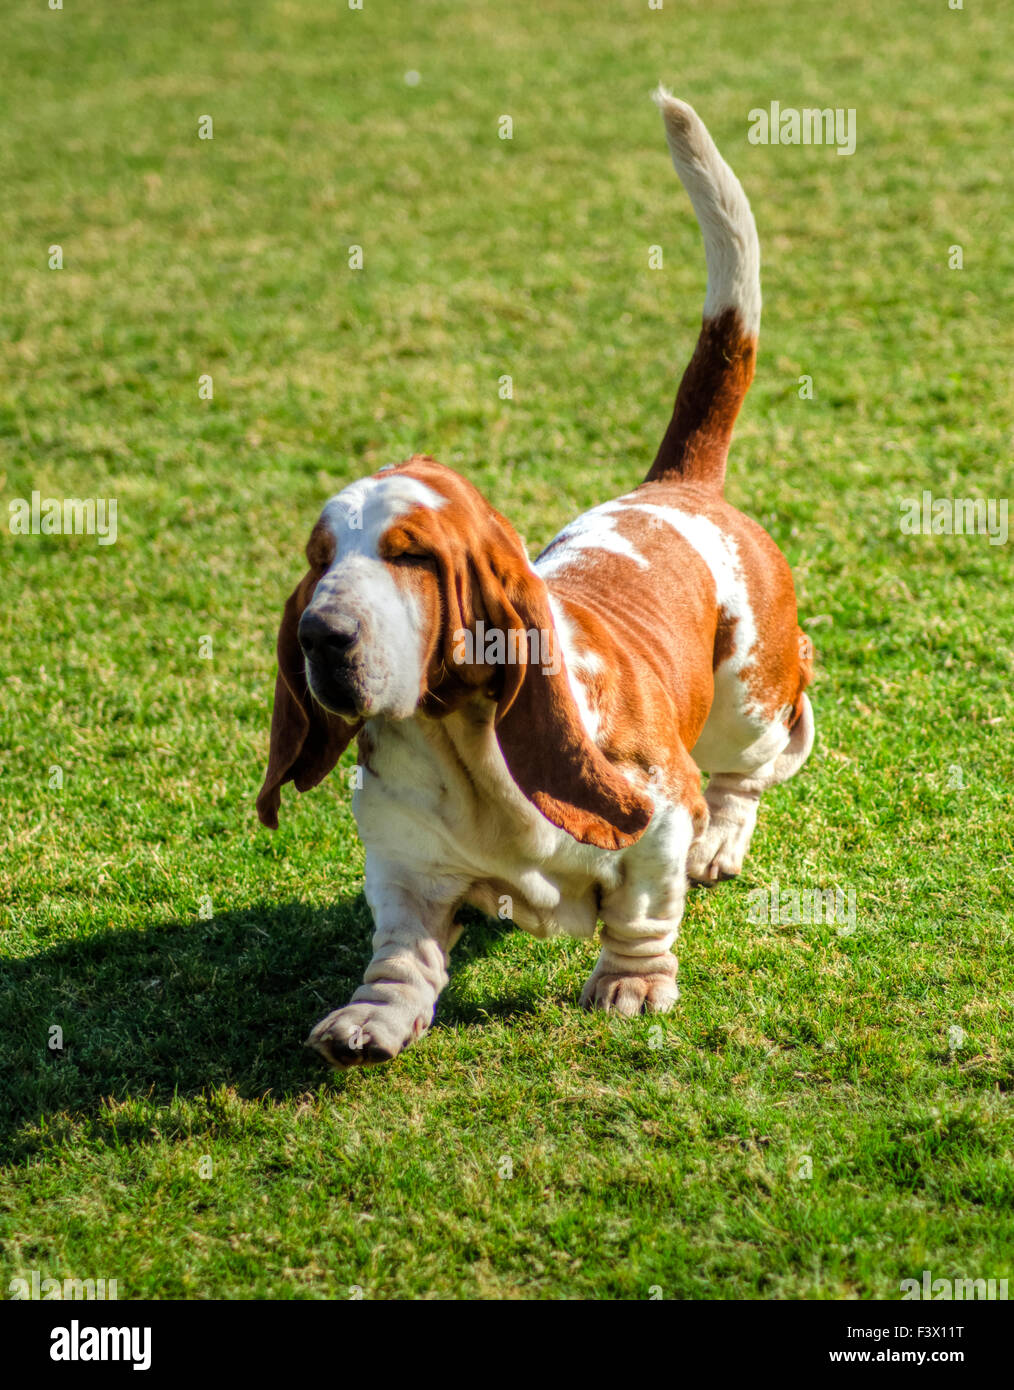 A Beautiful Red And White Basset Hound Dog Walking On The Lawn